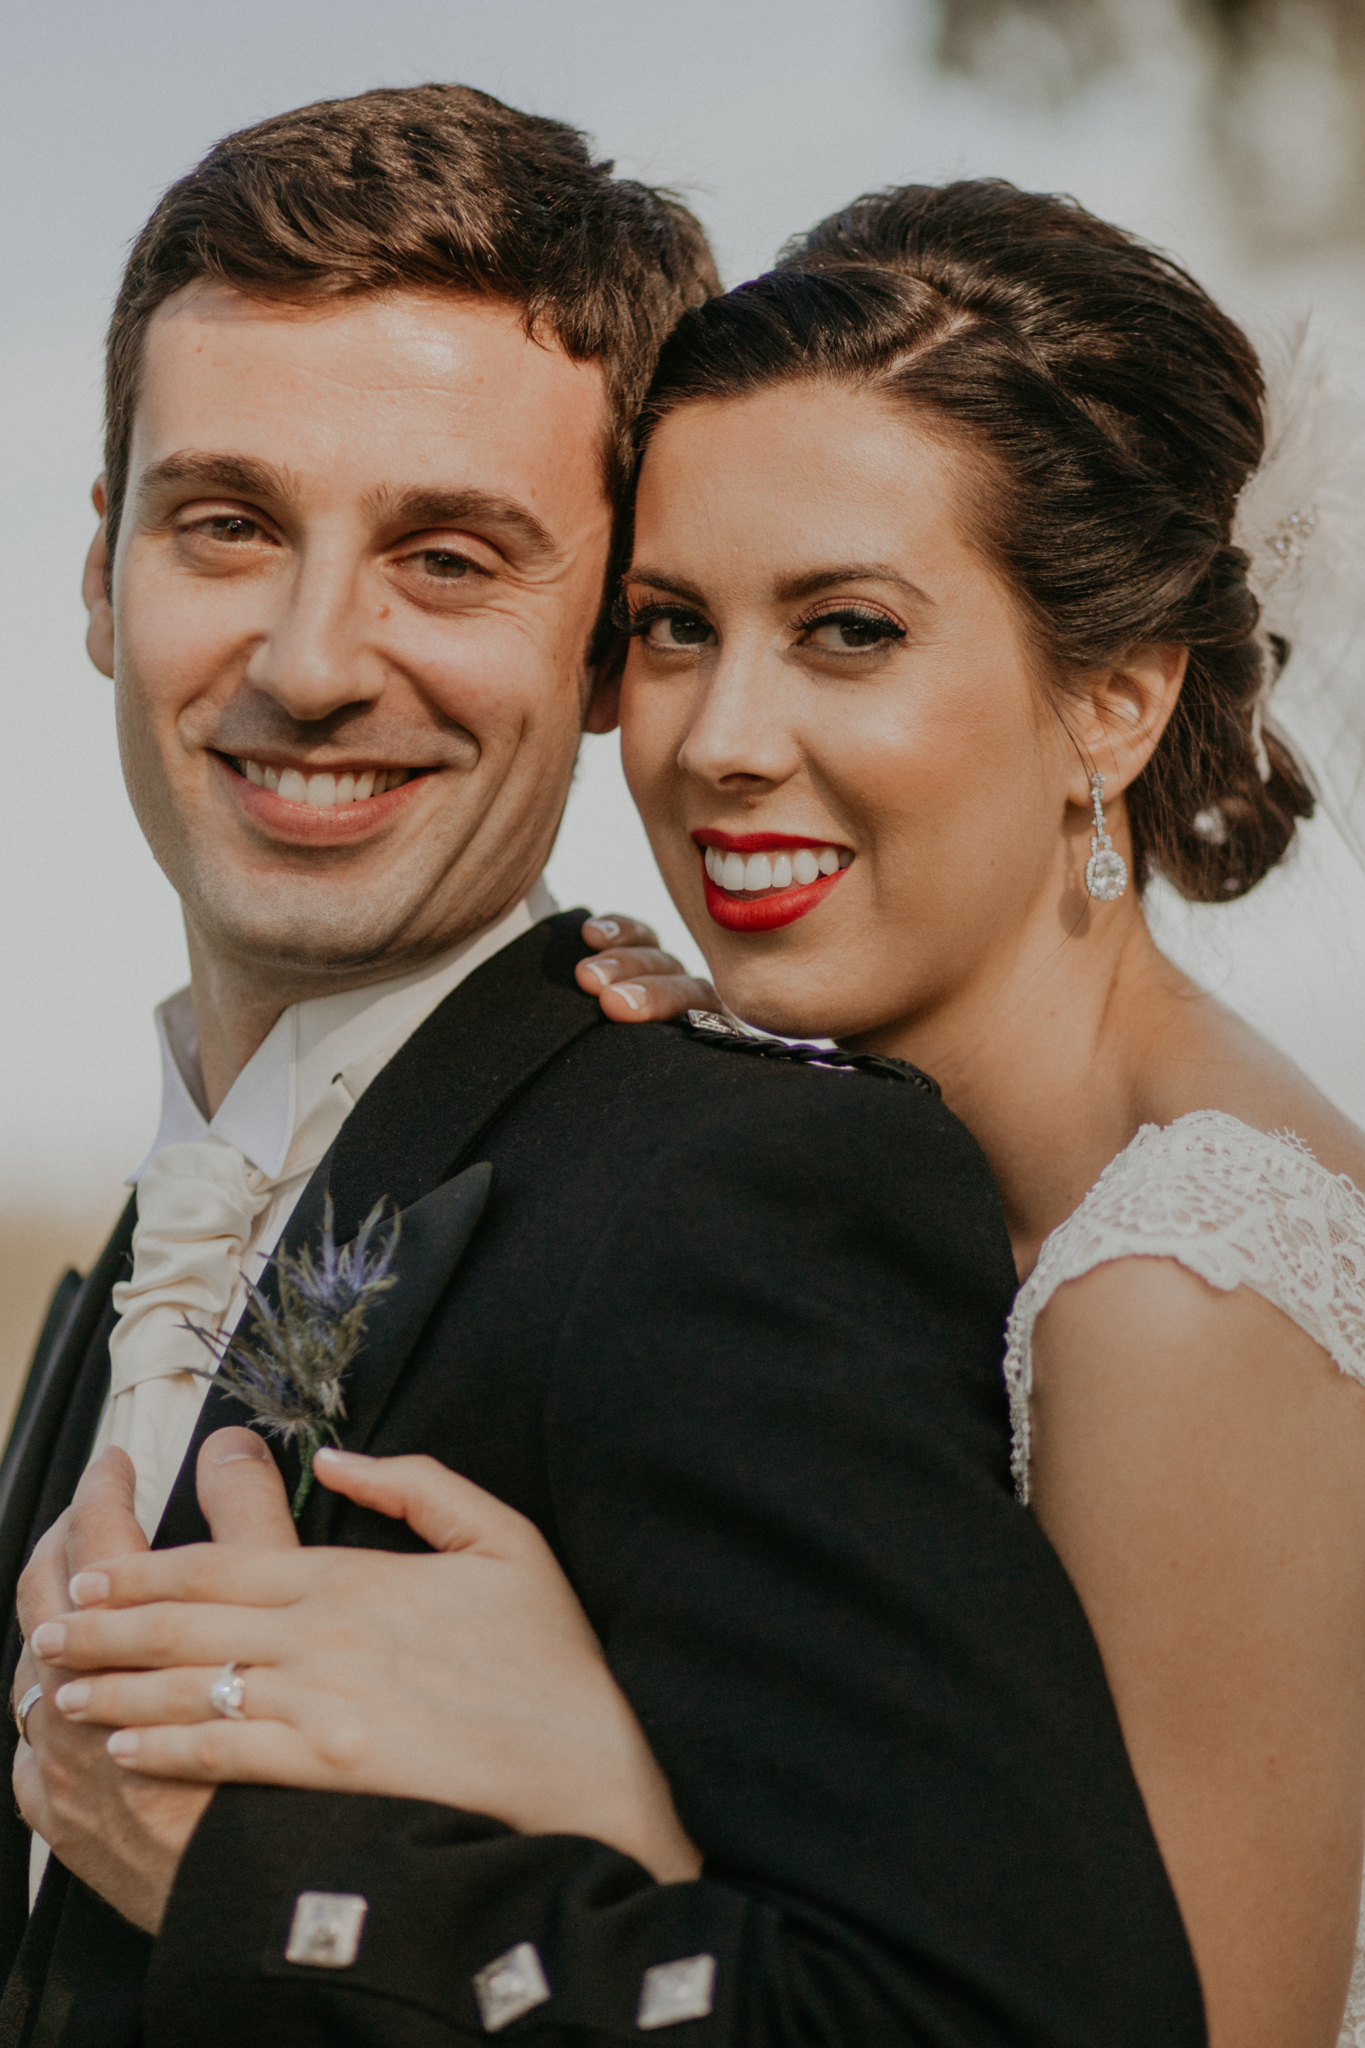 Portrait of bride and groom smiling close up romantic wedding photograph